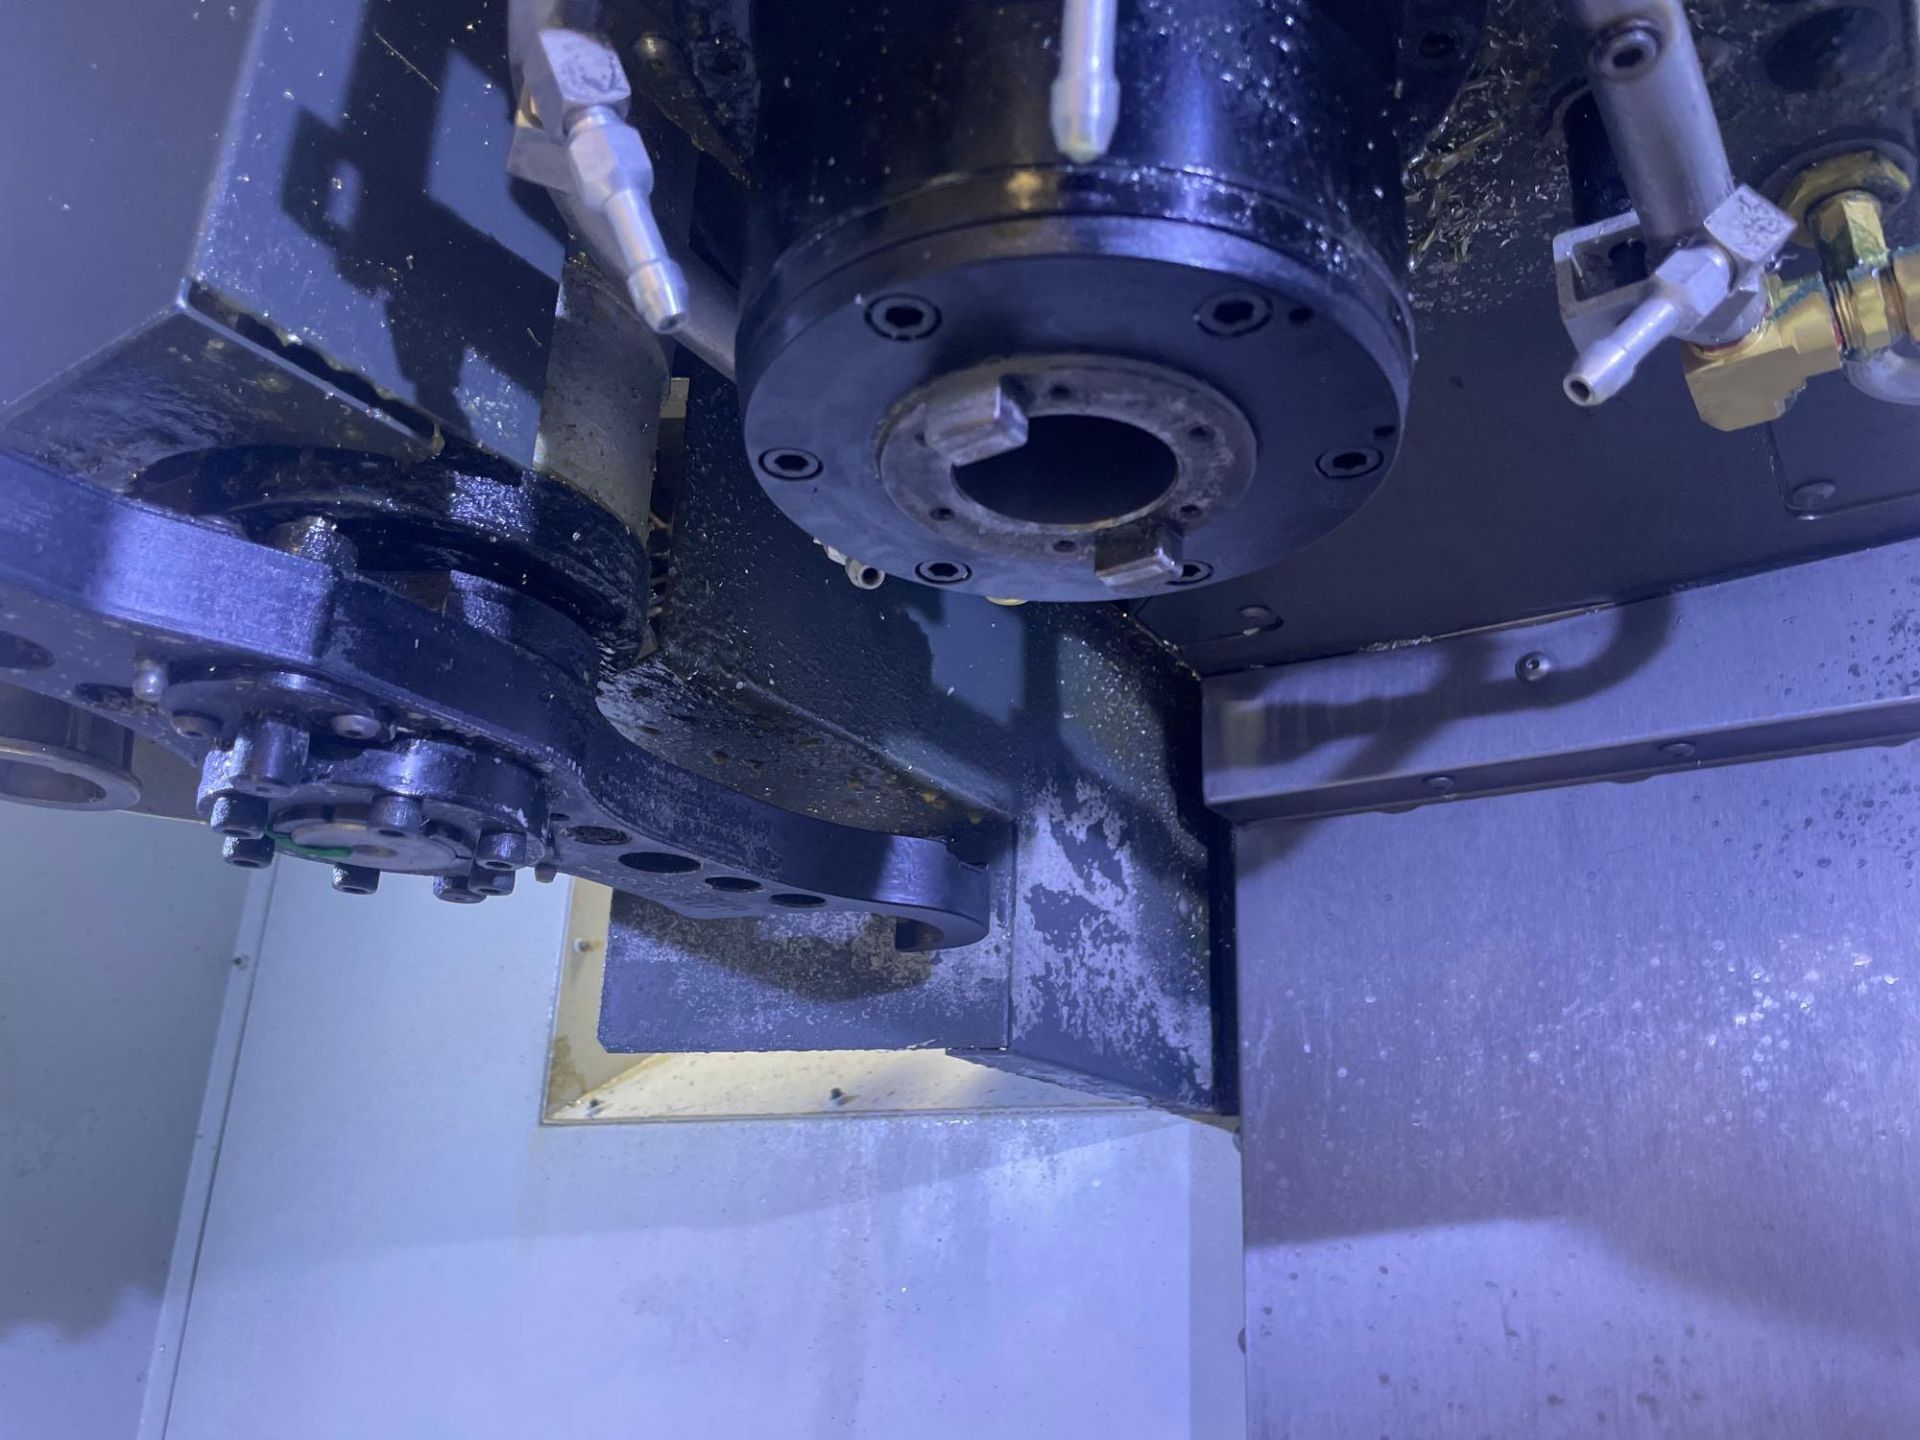 Haas DM-2, 28” x 16” 15.5” Travels, CT 40, 18+1 SMTC, 15K RPM, WIPS, New 2019 - Image 5 of 10